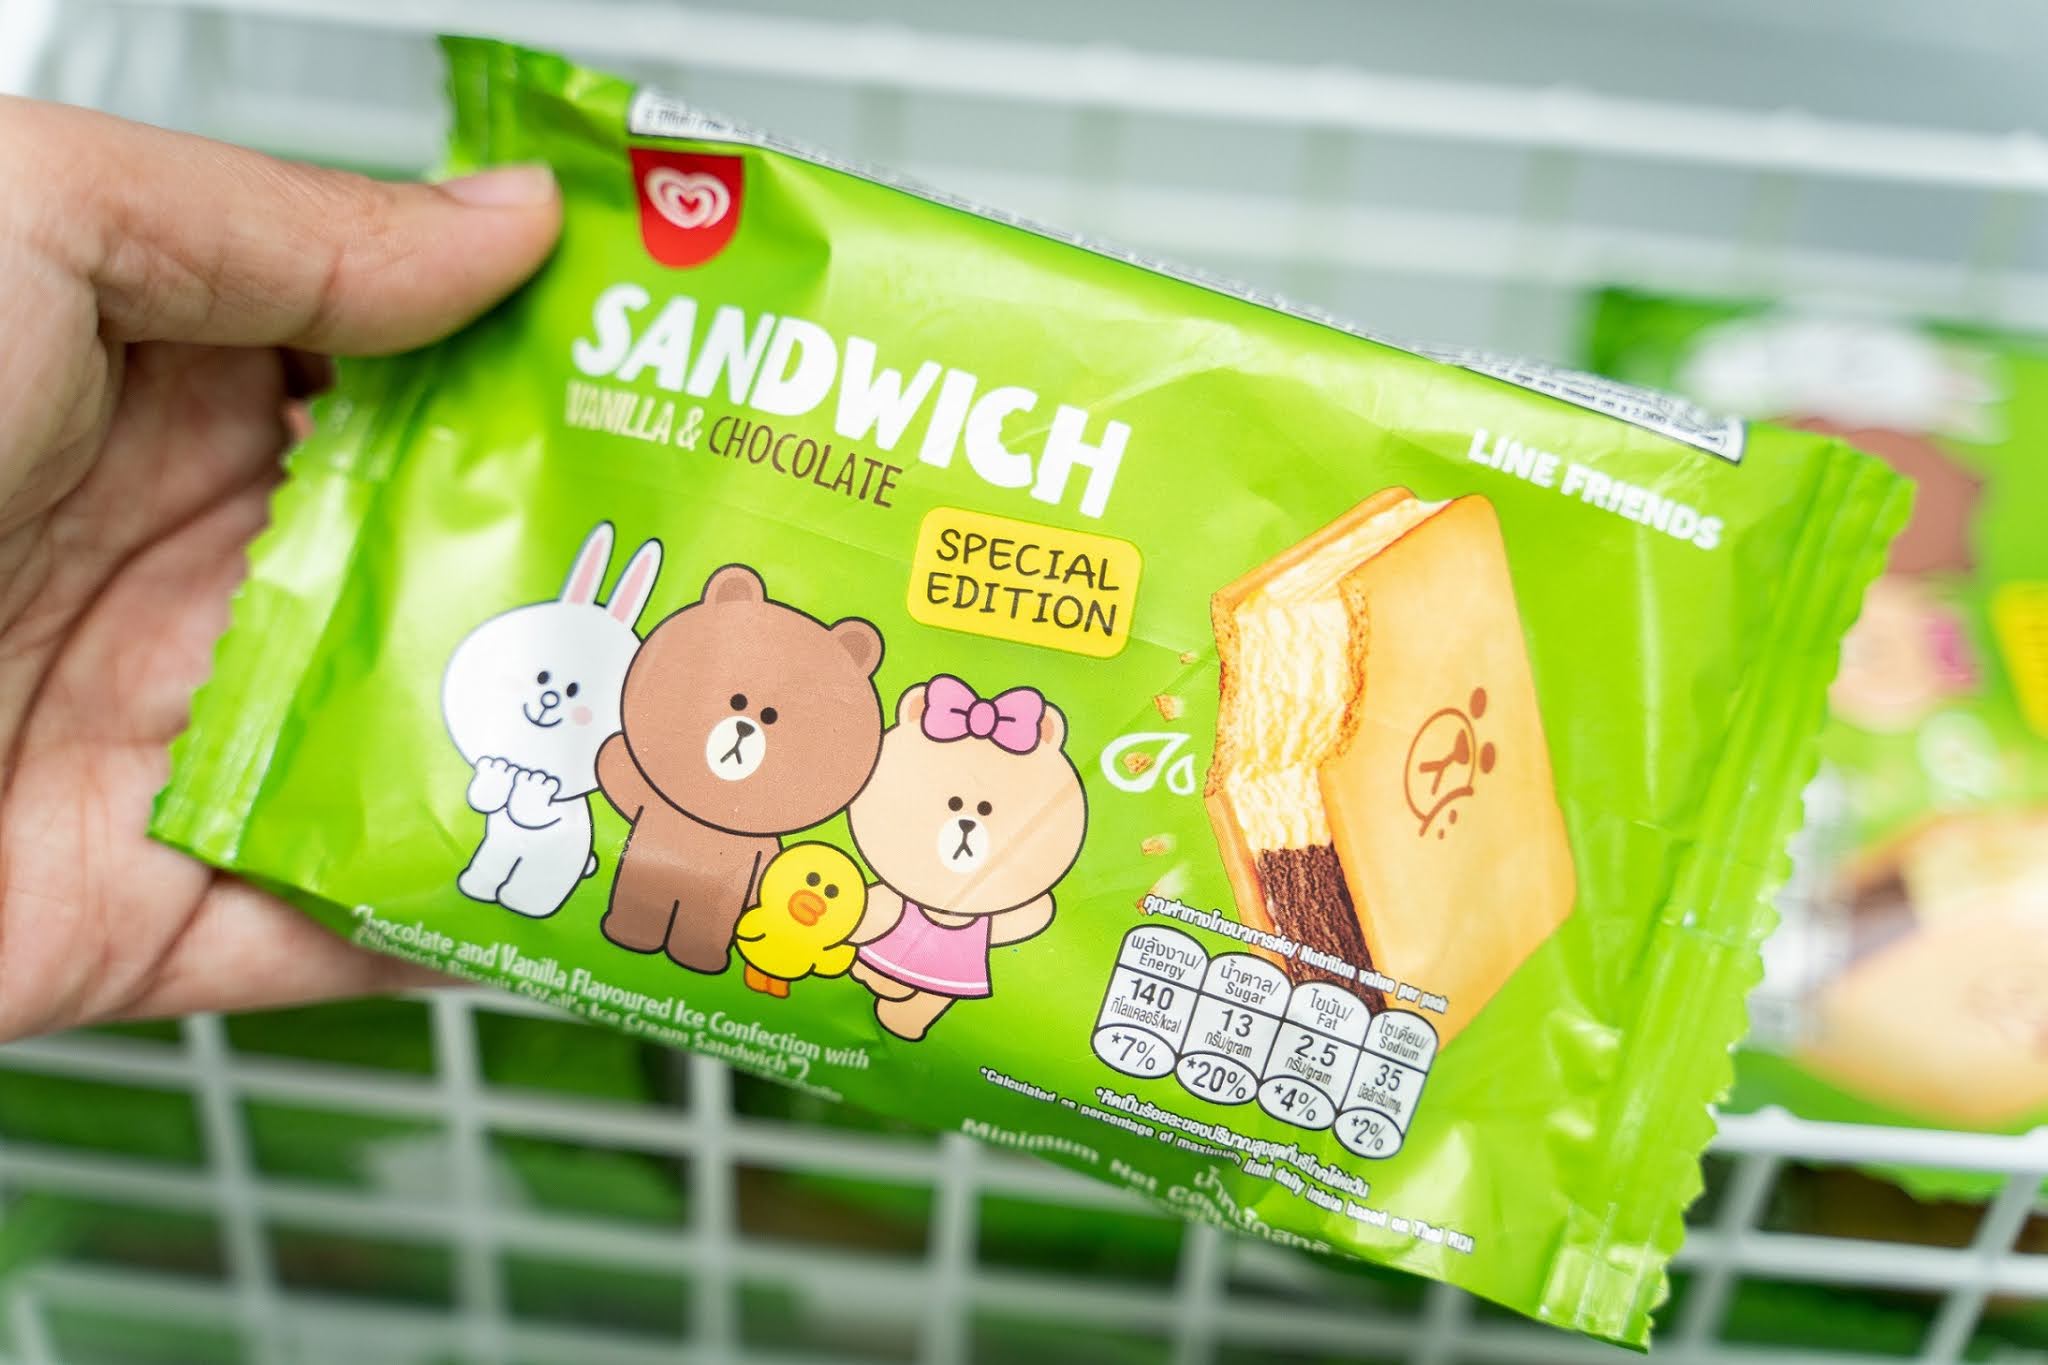 Follow Me To Eat La Malaysian Food Blog Wall S Ice Cream Launches Special Edition Line Friends Wall S Ice Cream Sandwich